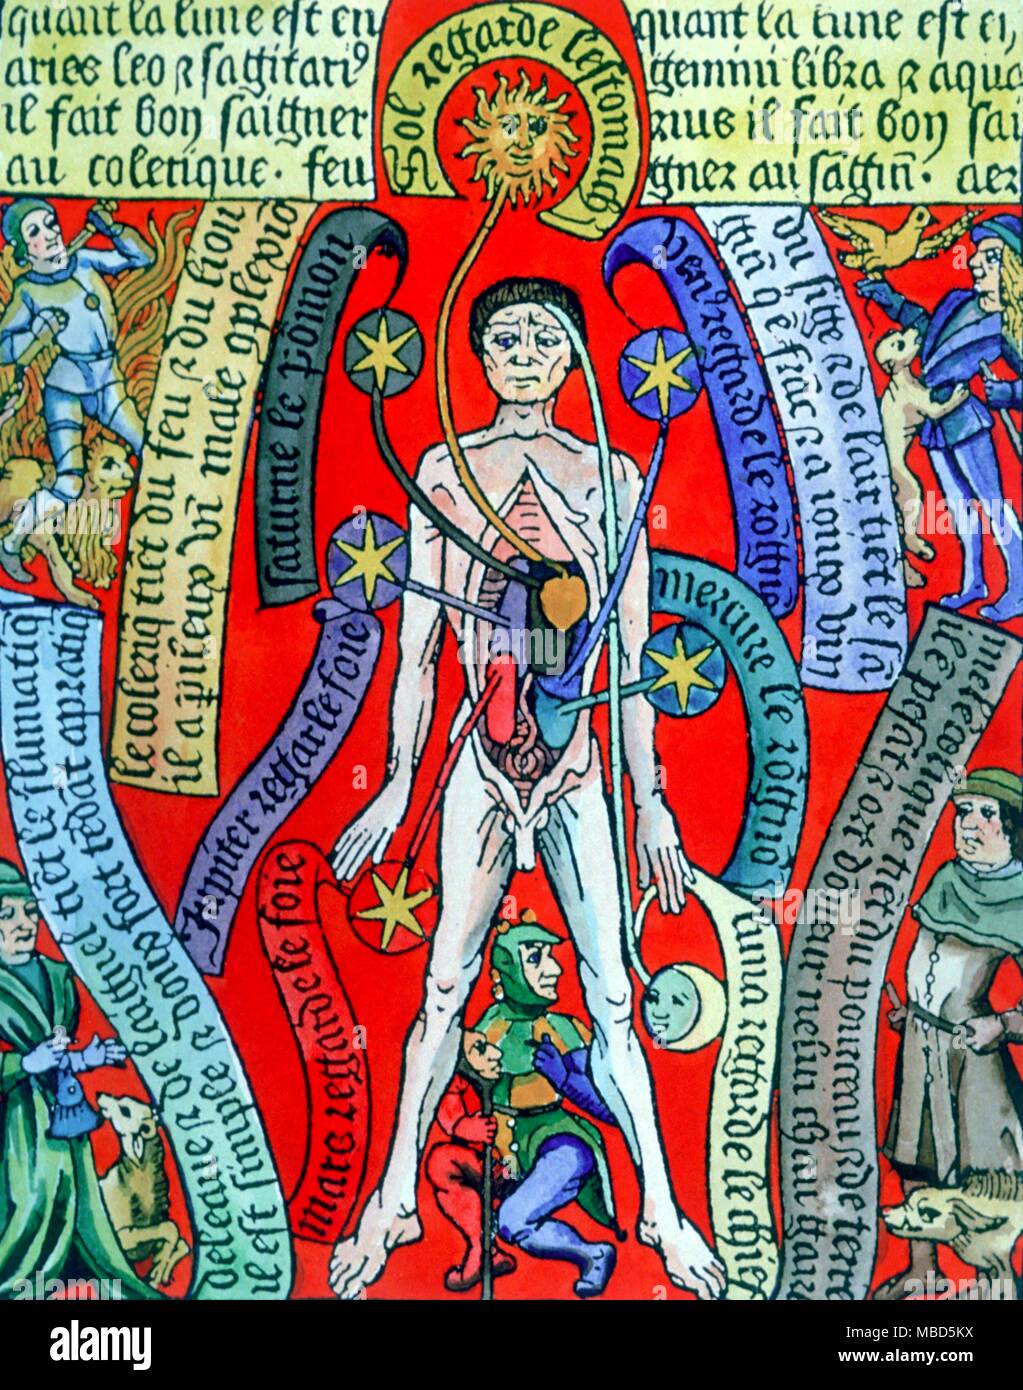 Medical - Internal rulerships. Medical chart for internal rulerships, with the medical man surrounded by the representations of the Four Elements, and with the Fool at his feet. Shepherd's Calendar of c.1495. Stock Photo